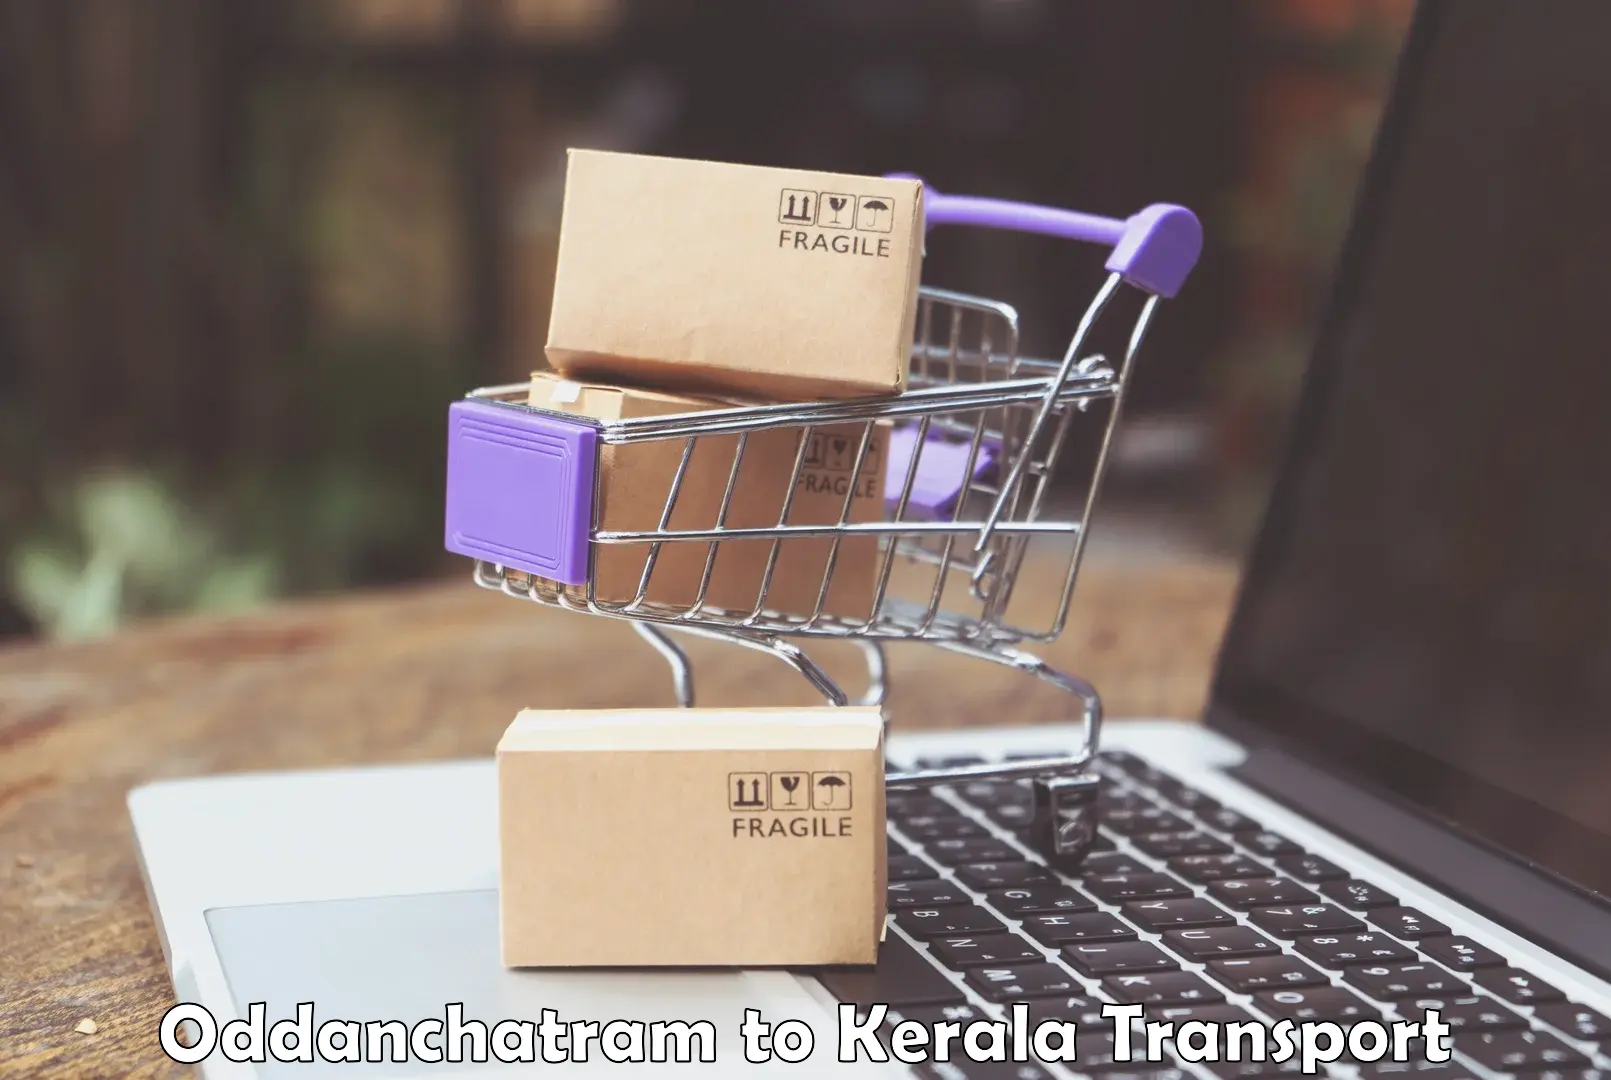 Transport bike from one state to another in Oddanchatram to Kerala